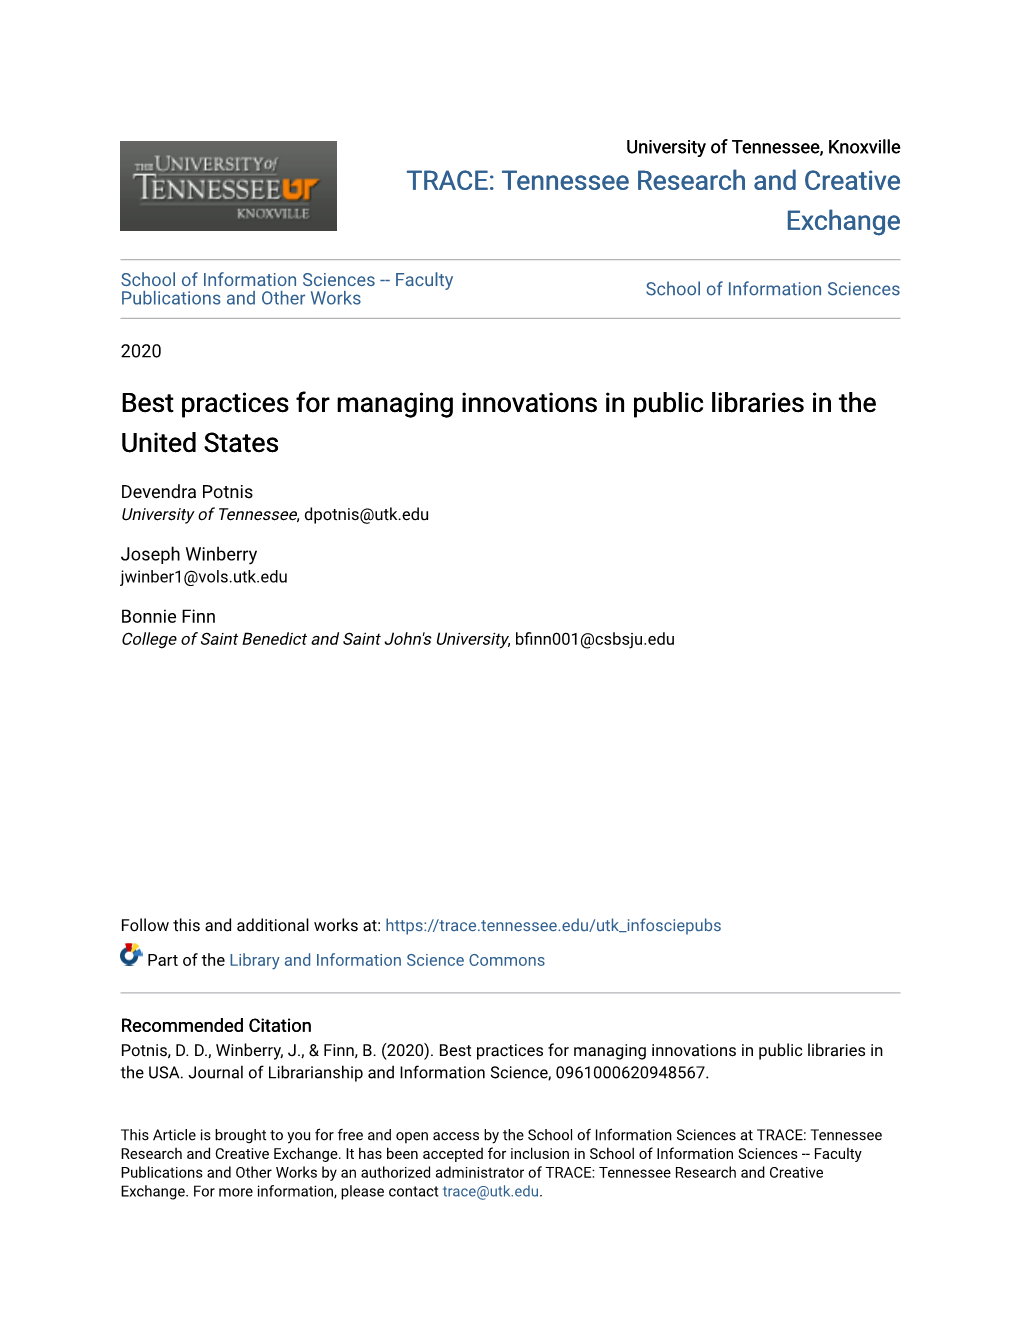 Best Practices for Managing Innovations in Public Libraries in the United States